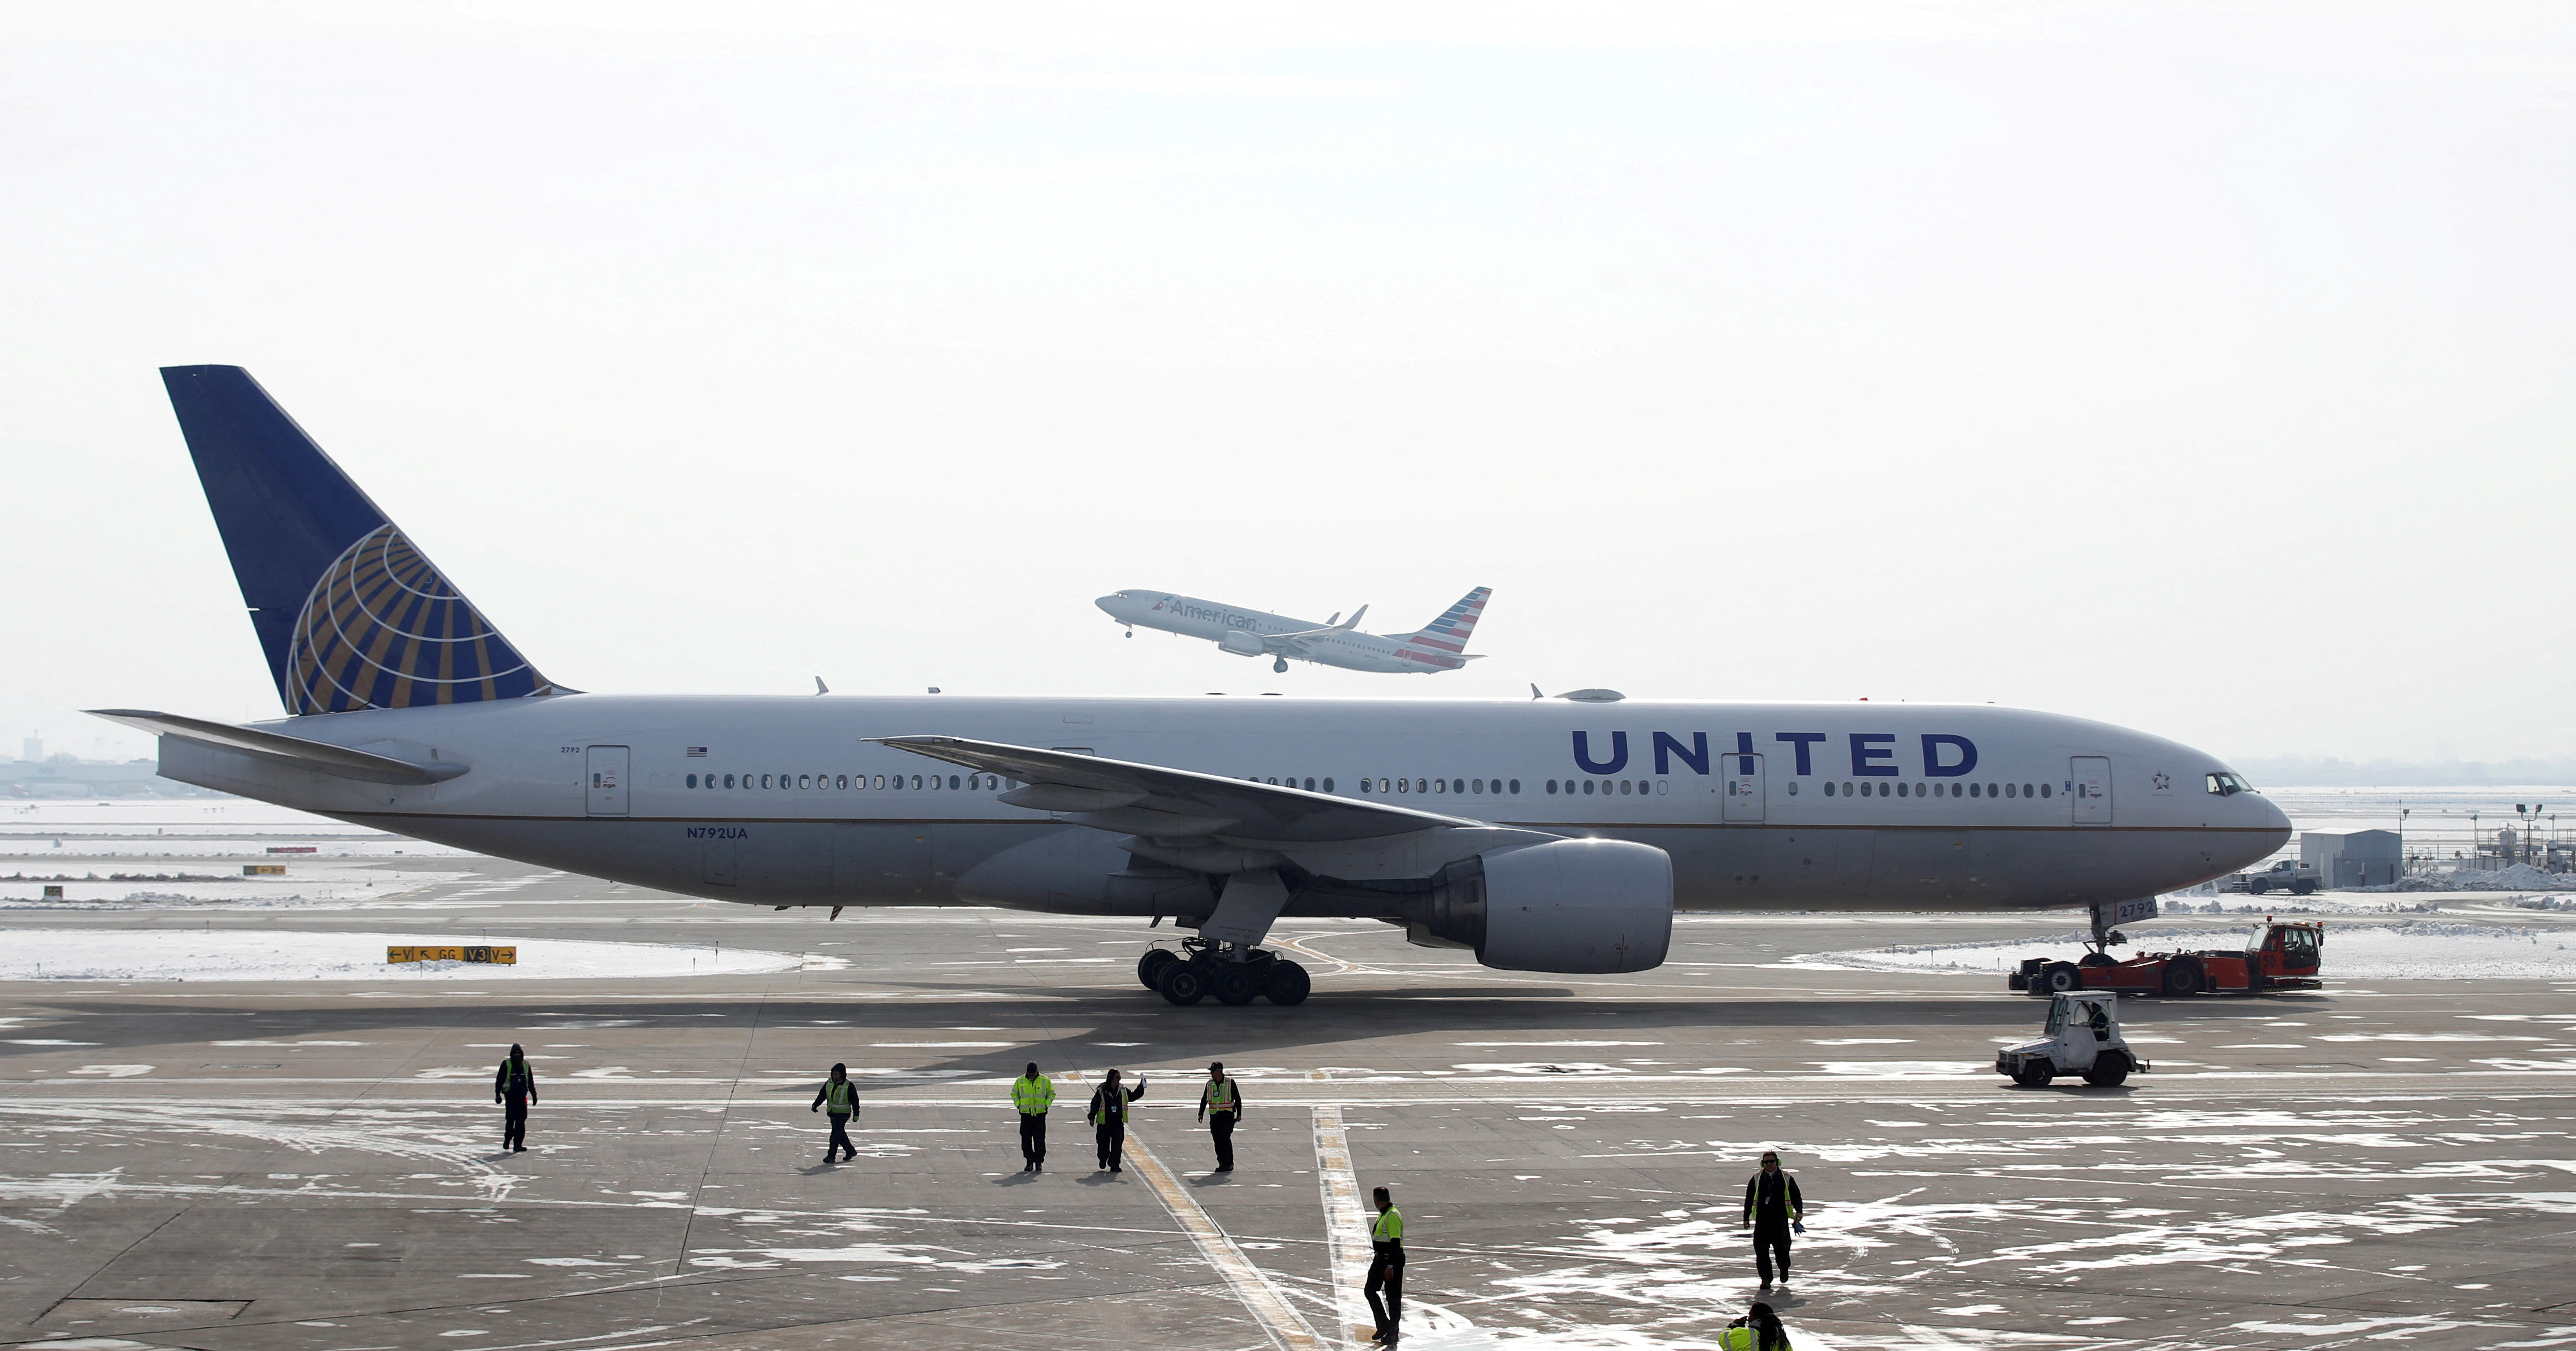 A United Airlines Boeing 777 plane is towed at O'Hare International Airport in Chicago